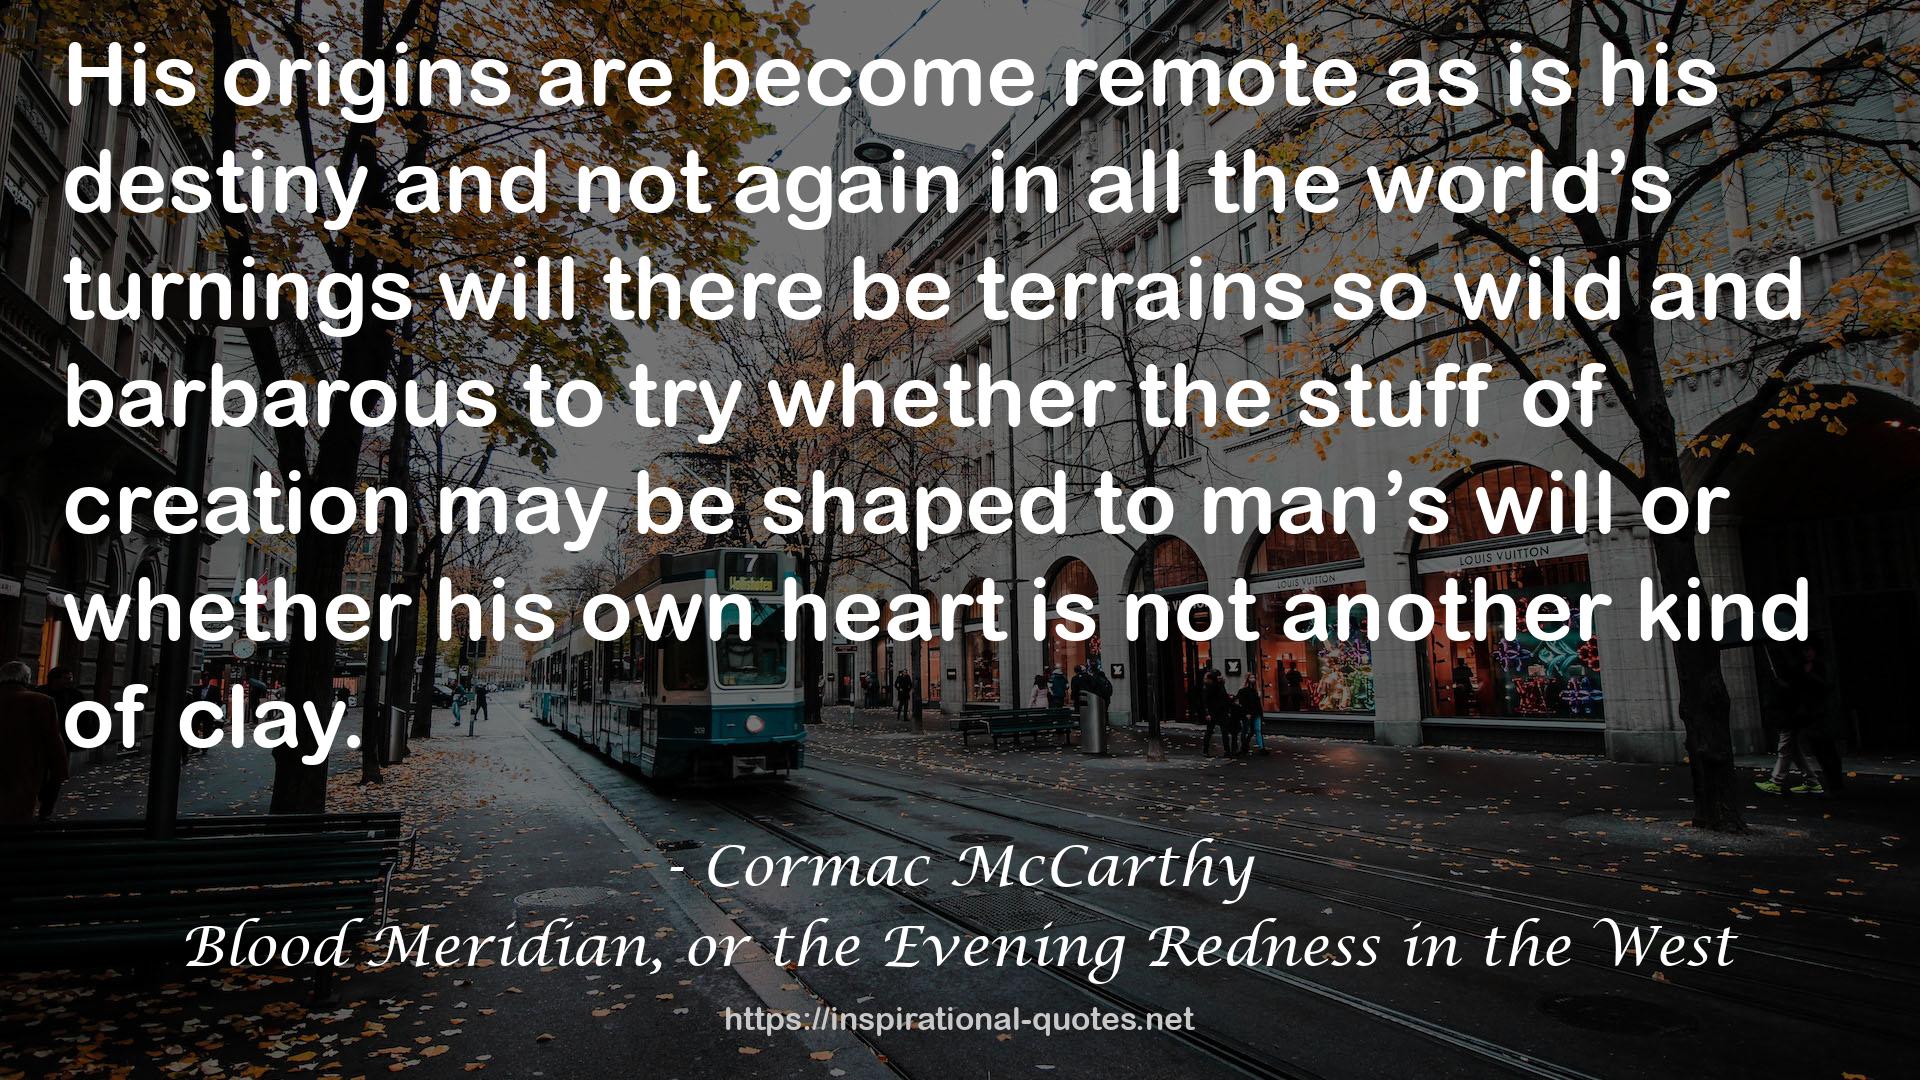 Blood Meridian, or the Evening Redness in the West QUOTES